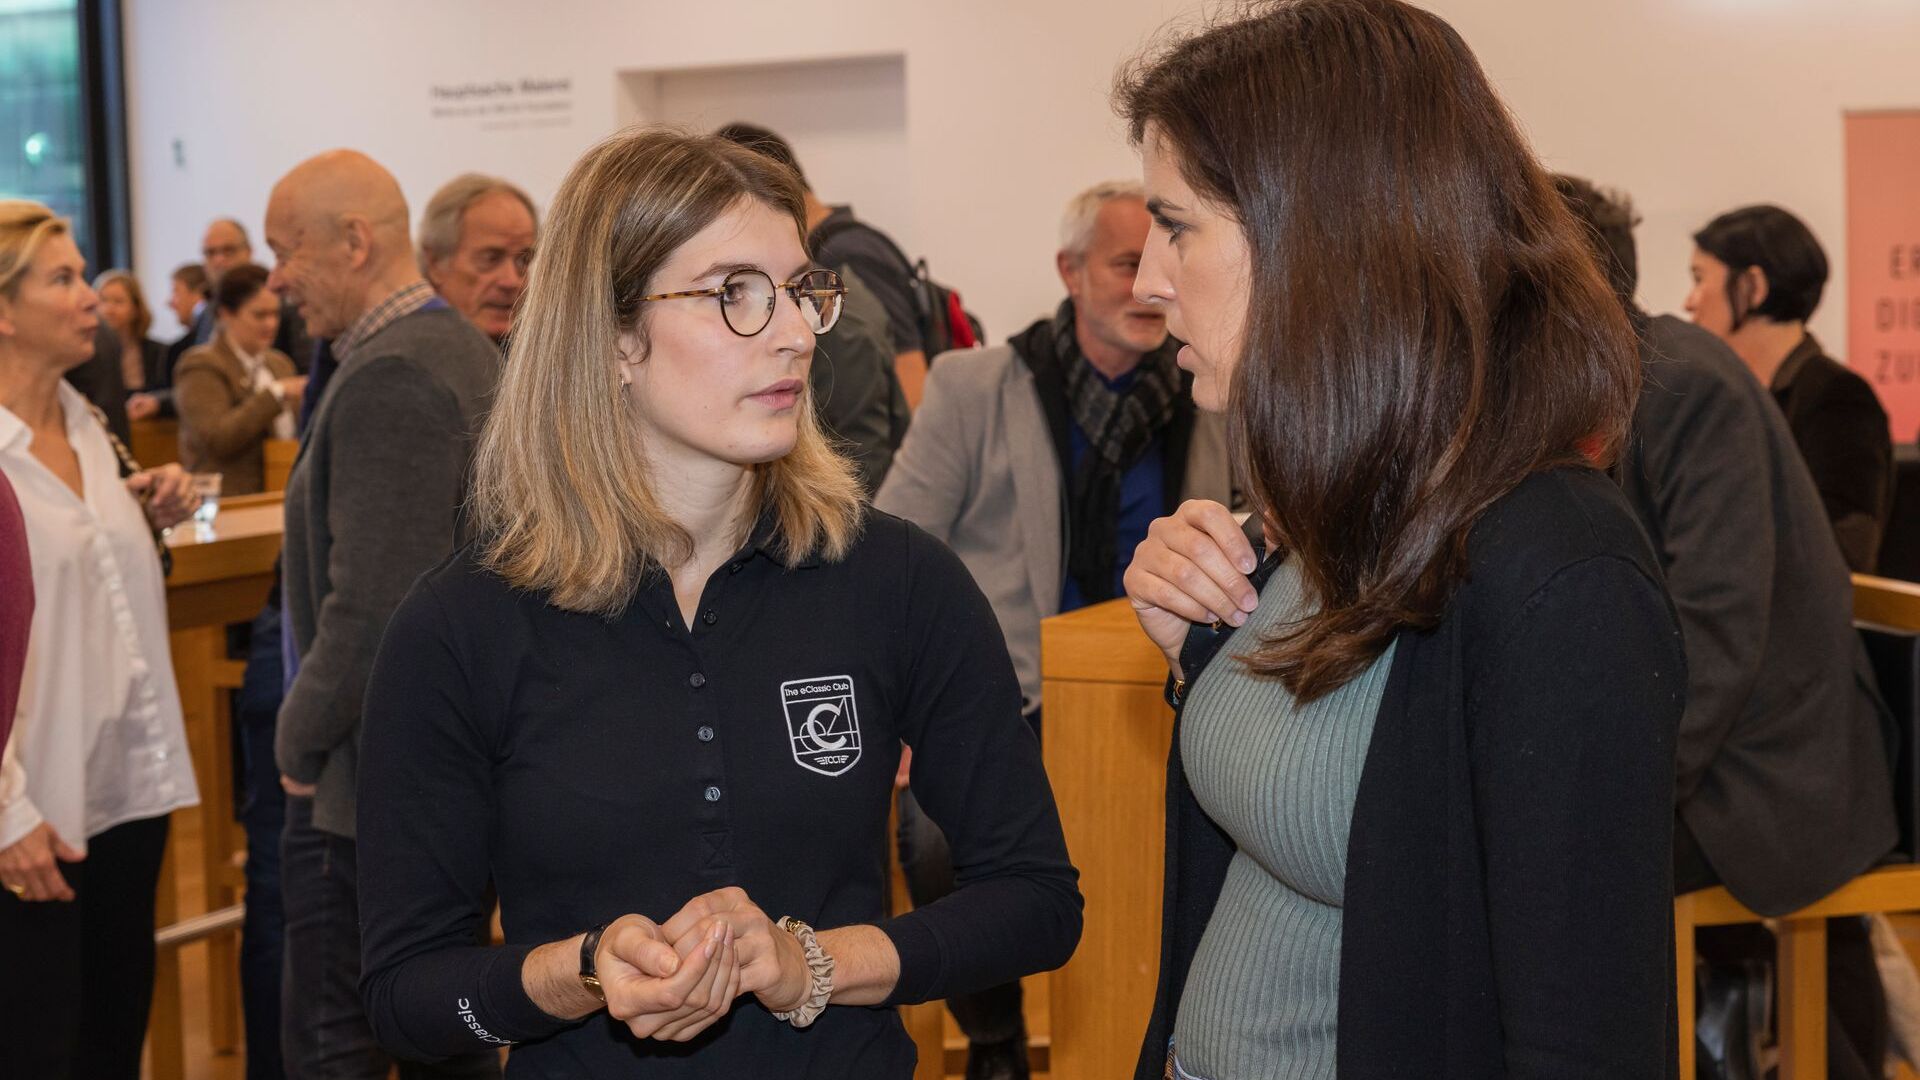 The "Digitaltag Vaduz" was welcomed by the Kunstmuseum of the capital of the Principality of Liechtenstein on Saturday 6 November 2021